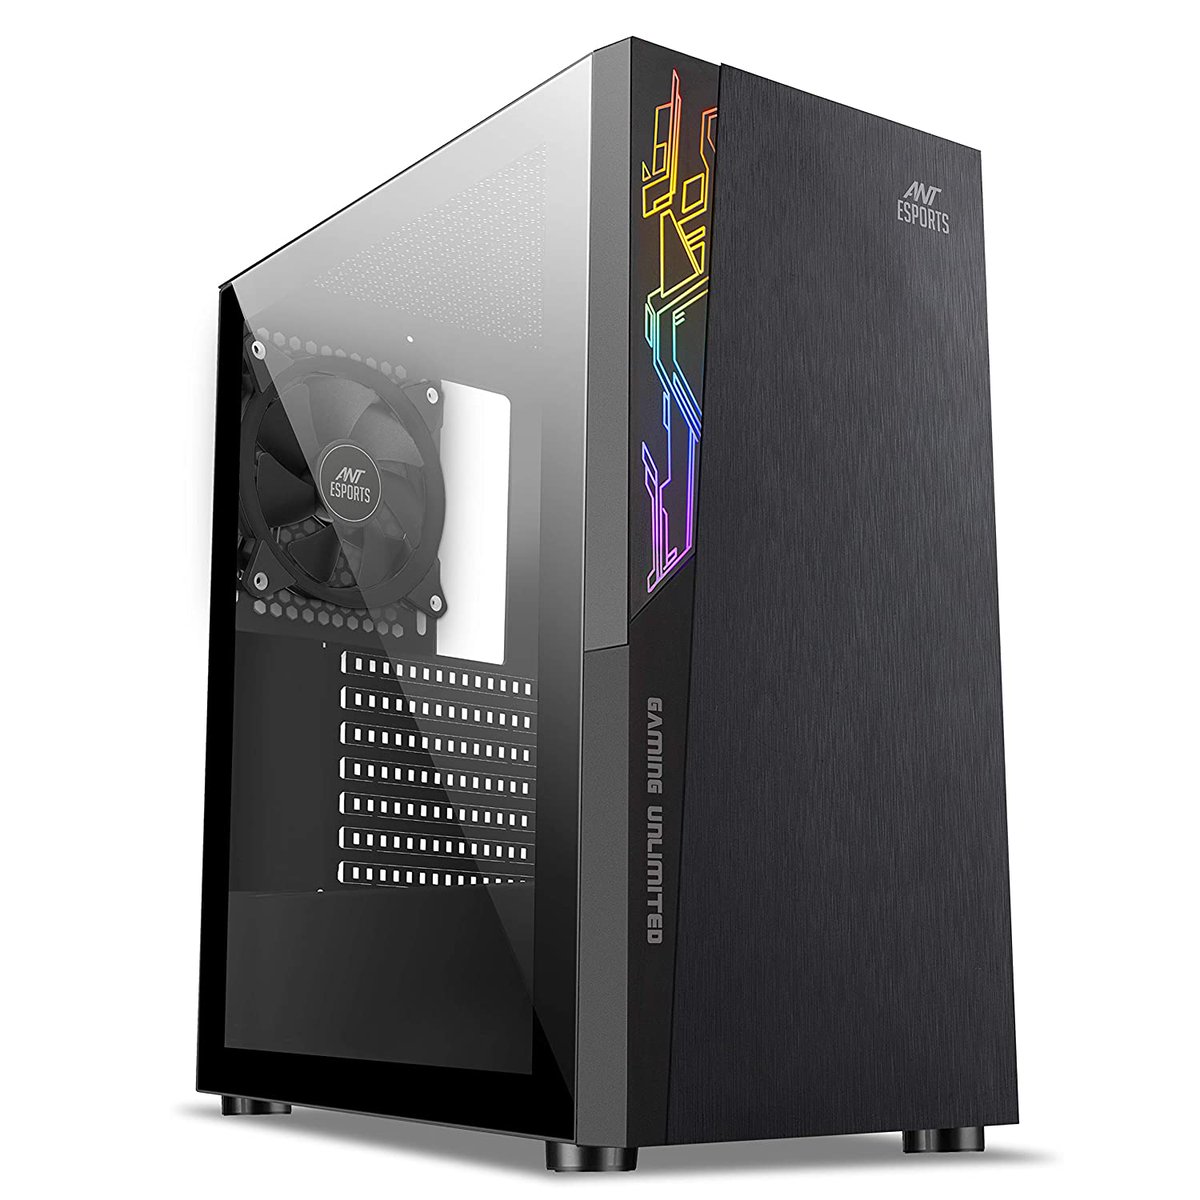 Gaming PC Intel Core I5 6th Gen, 16GB, 240 SSD, 1TB, Win 10

Buy Now on etradus.in/product/brande…

Intel Core I5 6th Gen Processor
Asus Z270F Gaming Motherboard
16 GB, 240 GB Crucial SSD HDD
1 TB Storage HDD
Win 10

#desktop #gamingpc #GamingPCs #computer #computersciencestudents